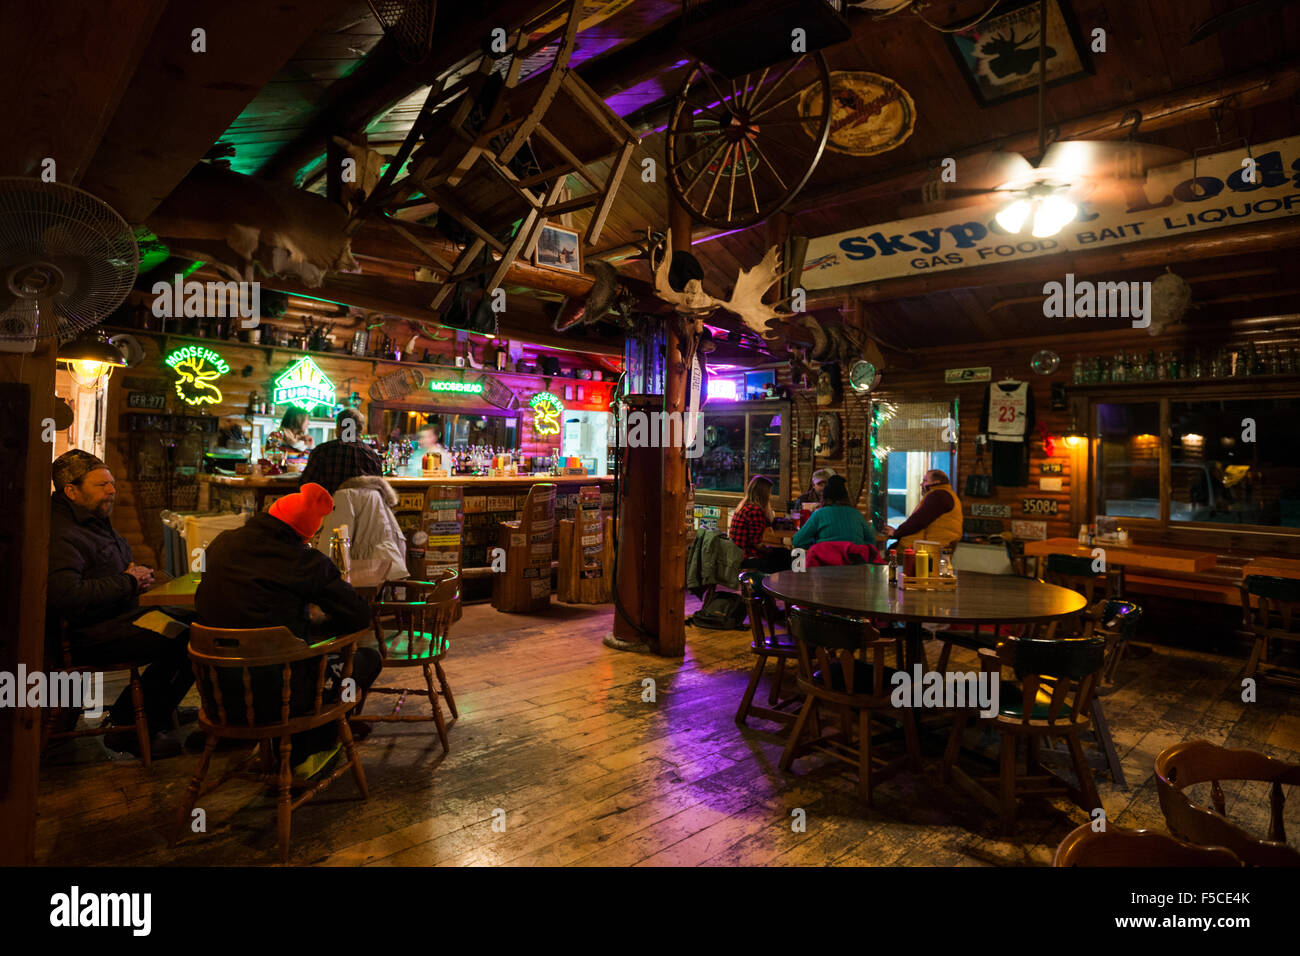 Popular stop on the Gunflint Trail to shop, drink or eat, Trail Center dining room, MN, USA Stock Photo